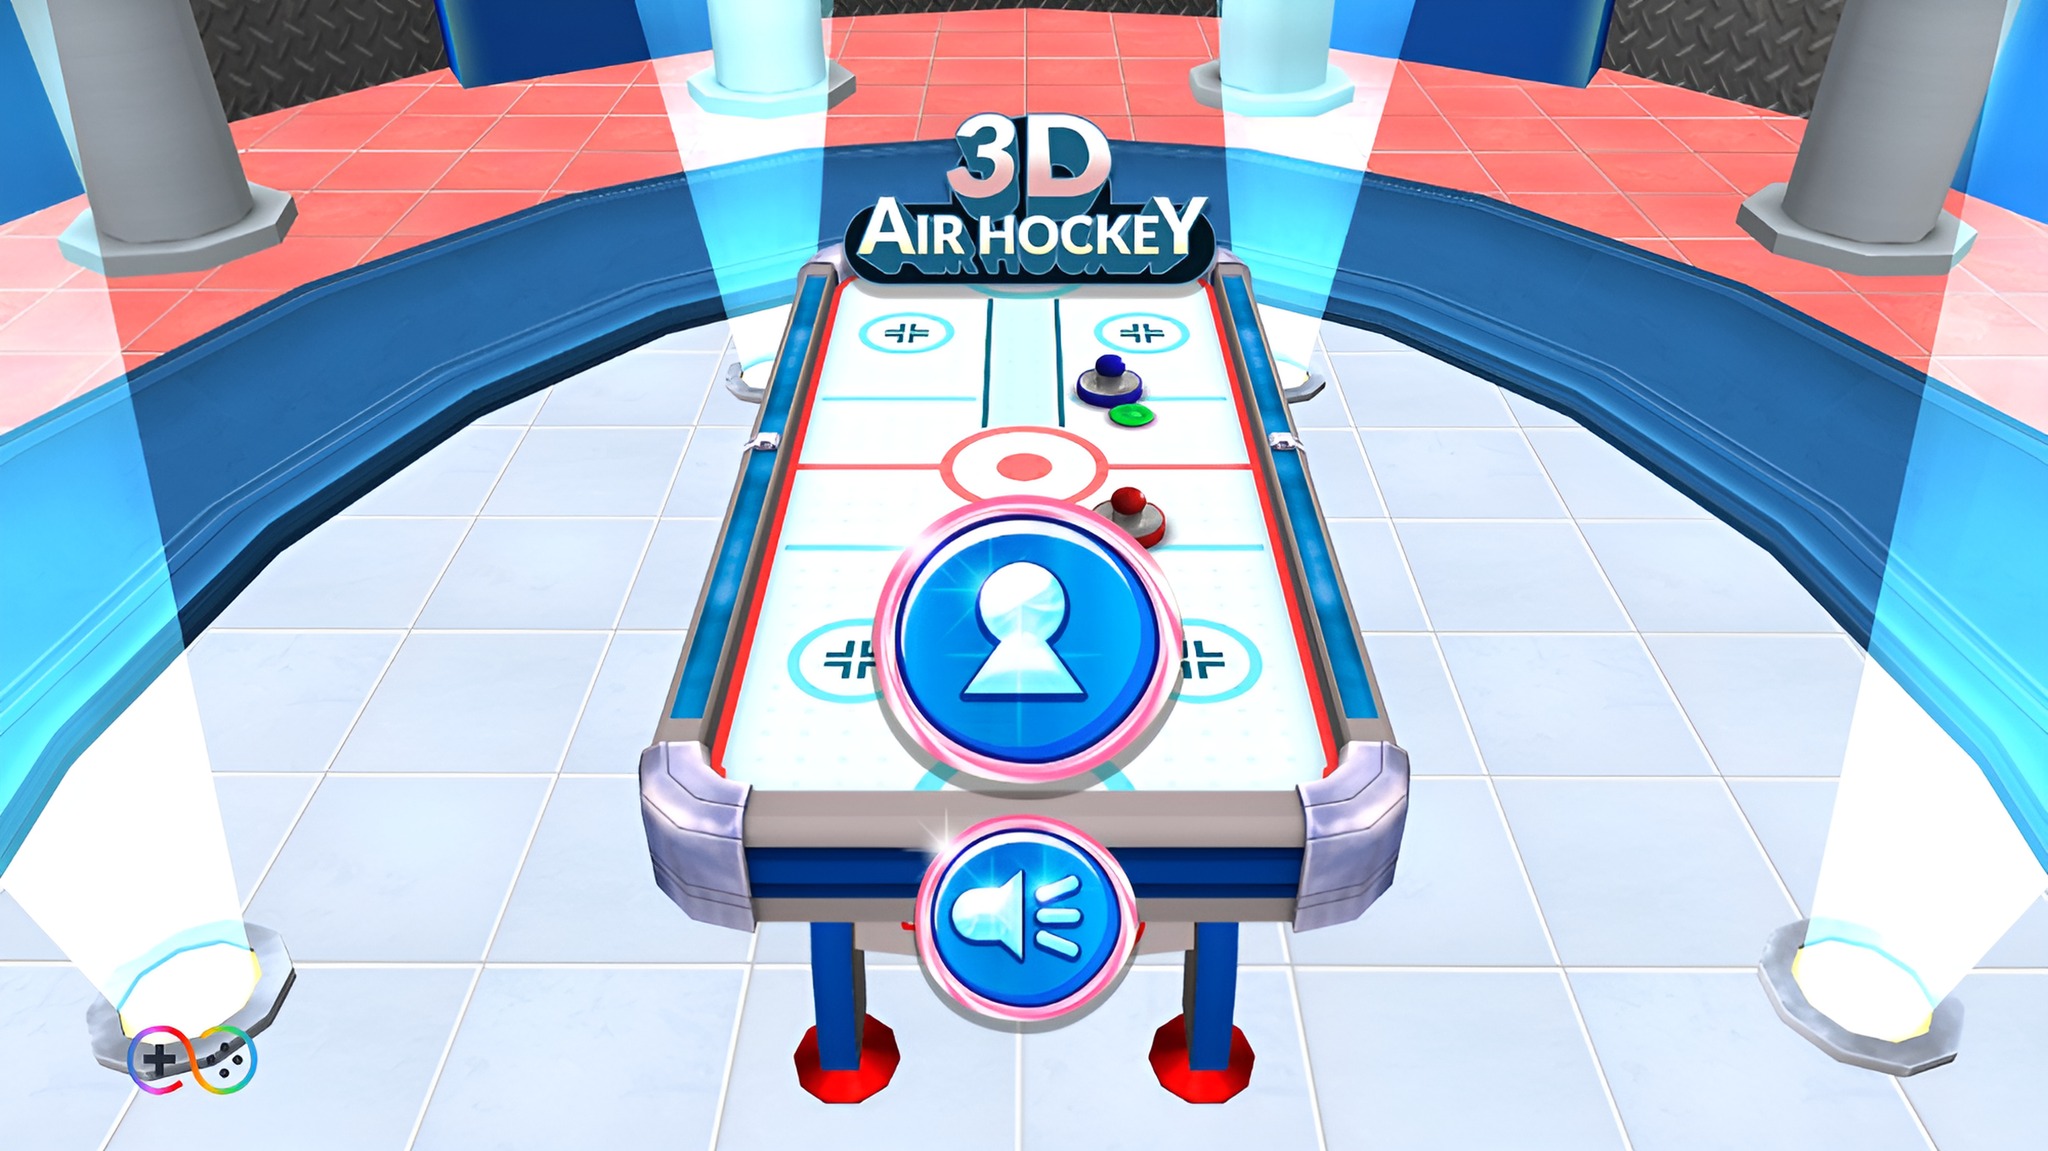 Image 3D Air Hockey - Play Free Online Sports Game